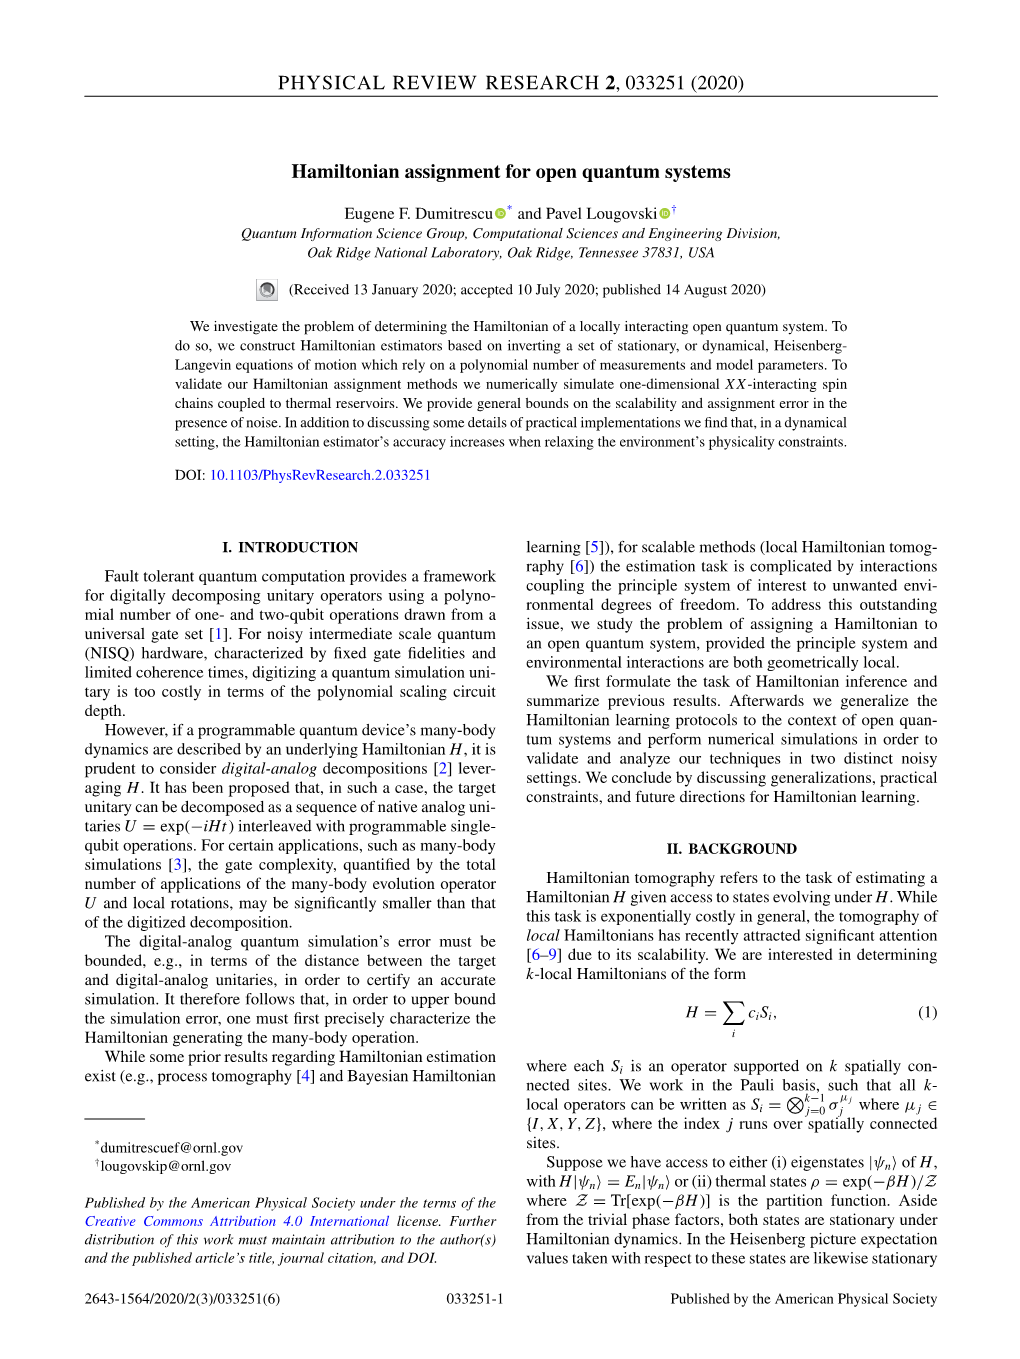 (2020) Hamiltonian Assignment for Open Quantum Systems